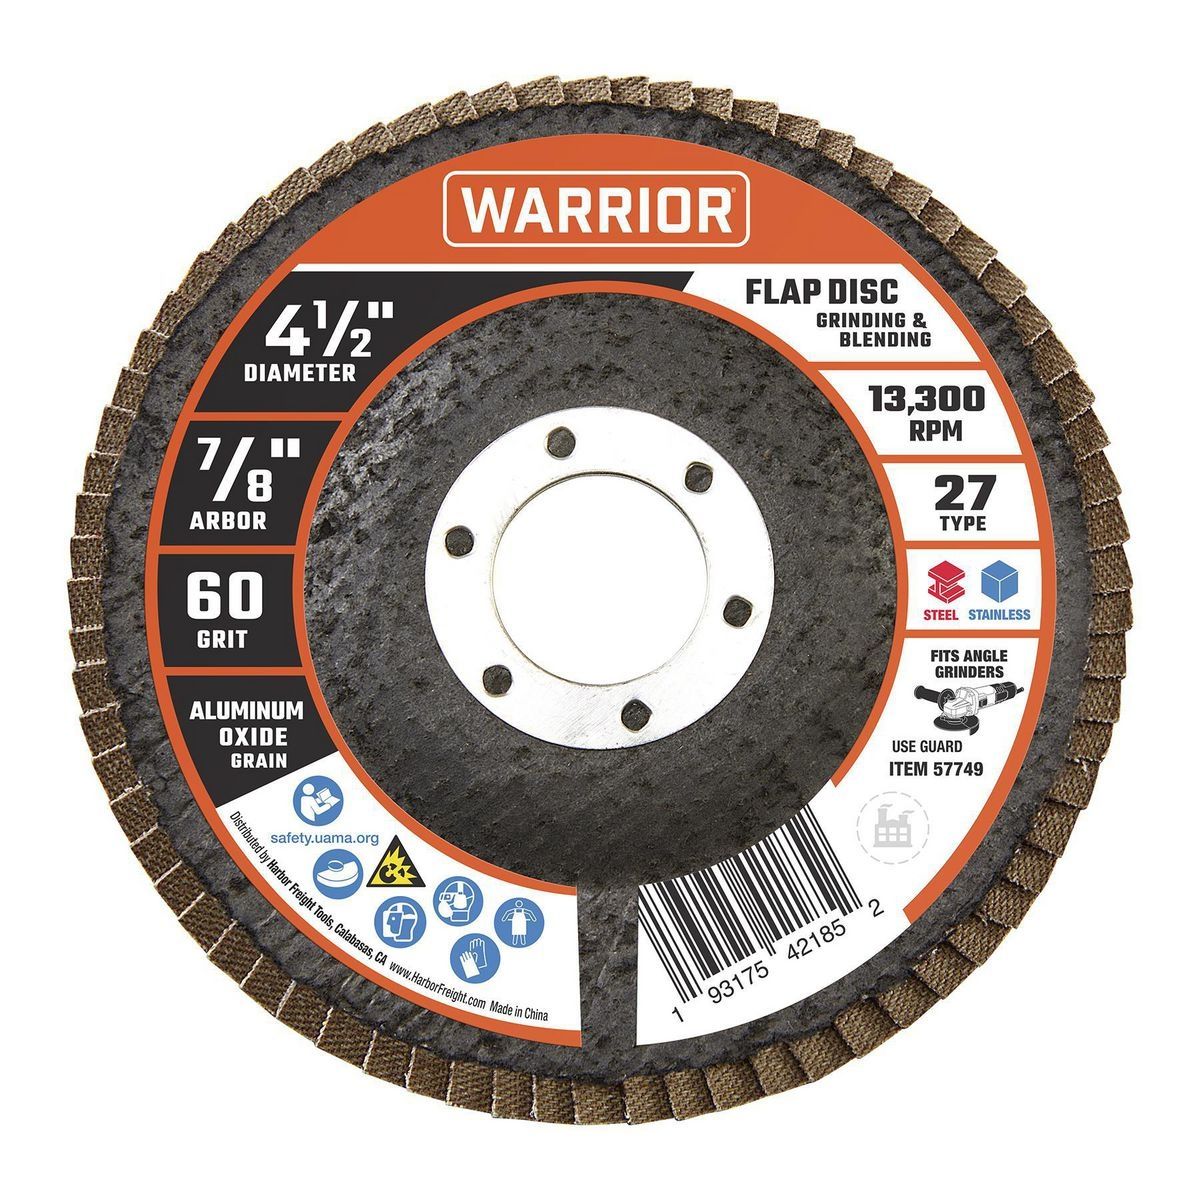 WARRIOR 4-1/2 in. x 7/8 in. 60-Grit Type 27 Flap Disc with Fiberglass Backing and Aluminum oxide Grain